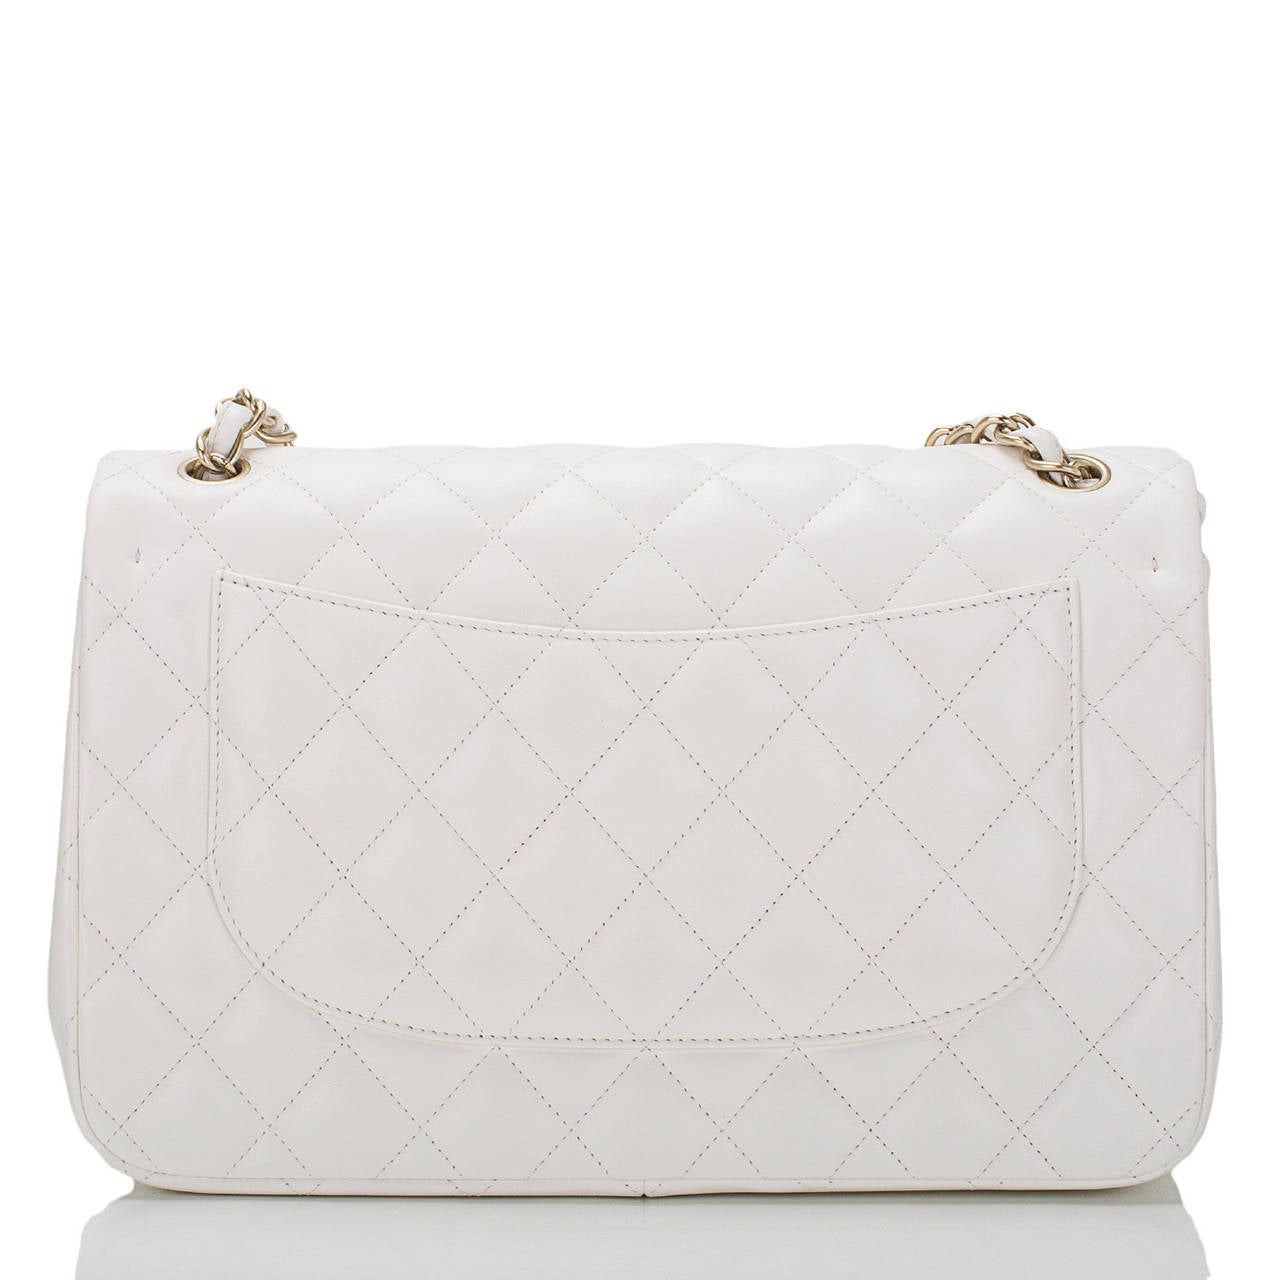 chanel classic flap white gold hardware